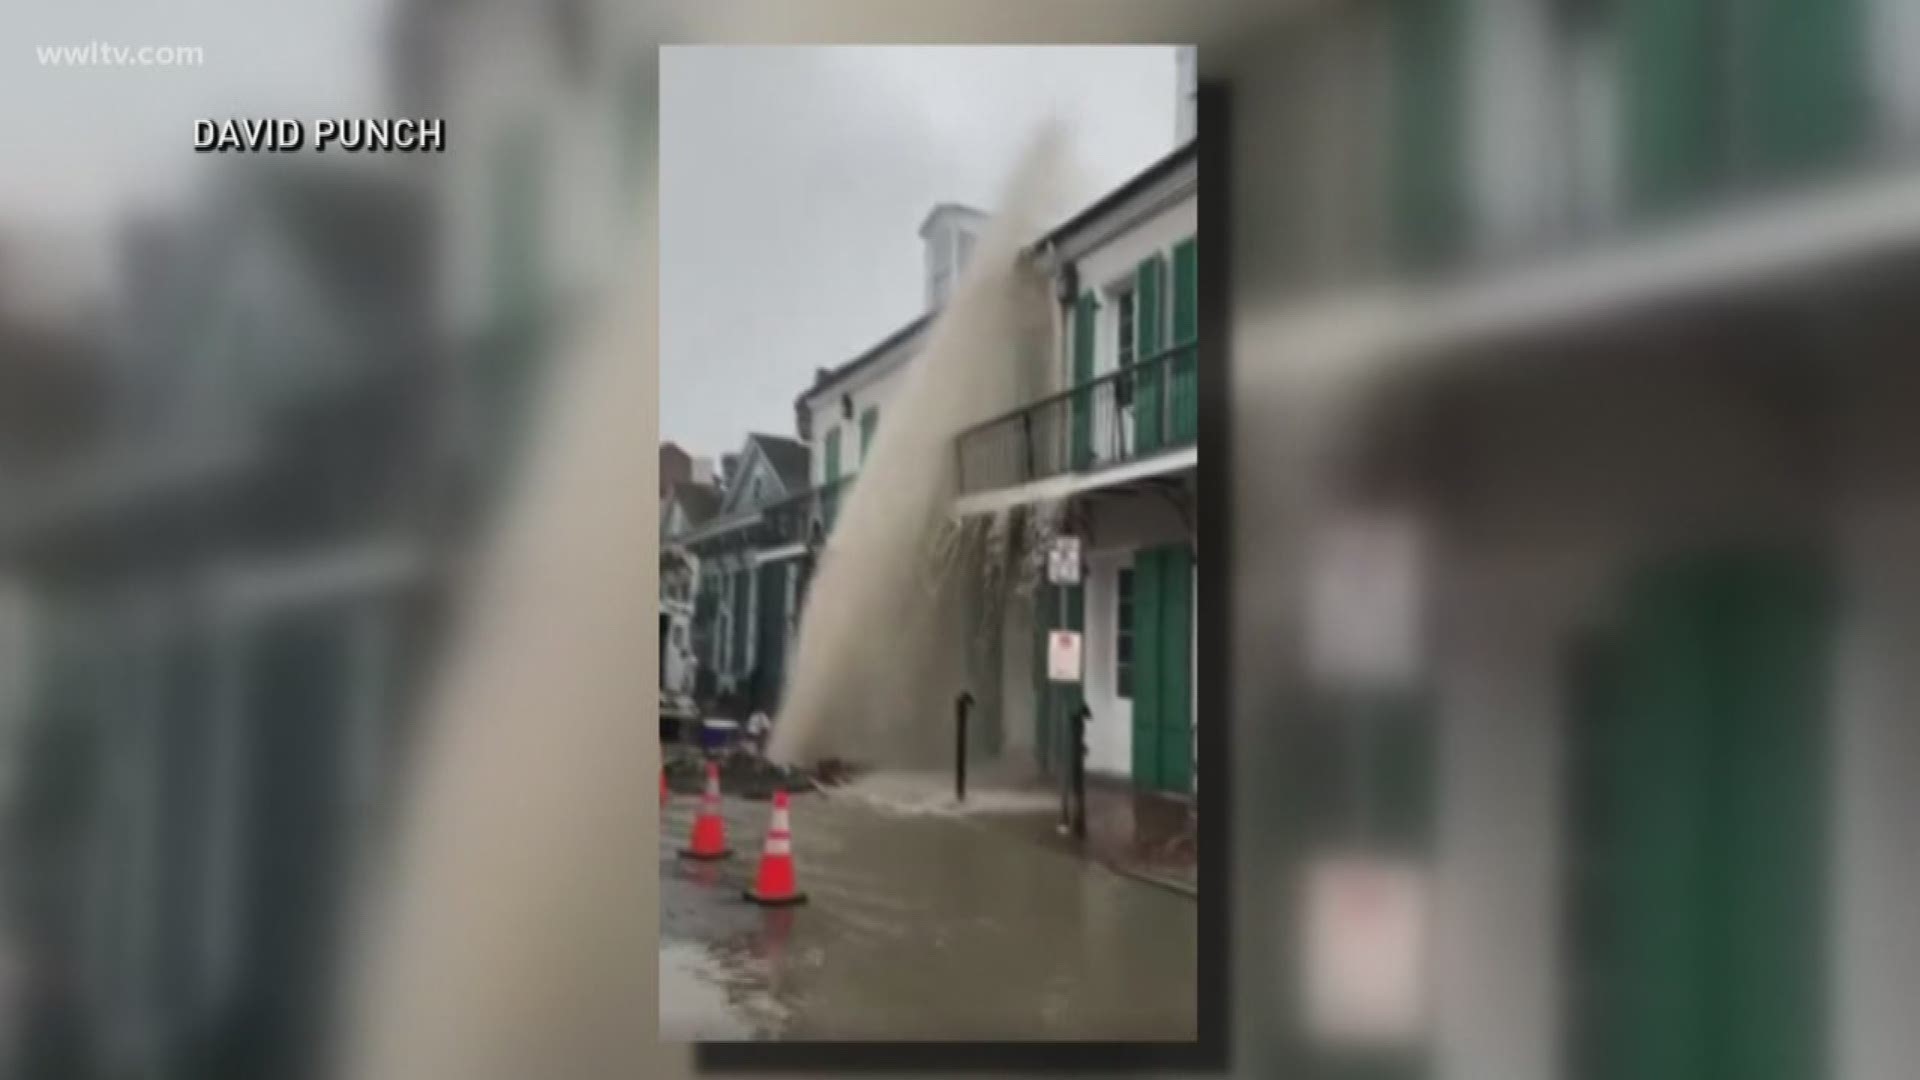 The water main that broke on St. Peter Street and Bourbon Street over the weekend, spewing a stream of water into the air and onto the Cat's Meow, was the result of an old corroded line more than 100 years old, according Richard Rainey with the Sewerage and Water Board.